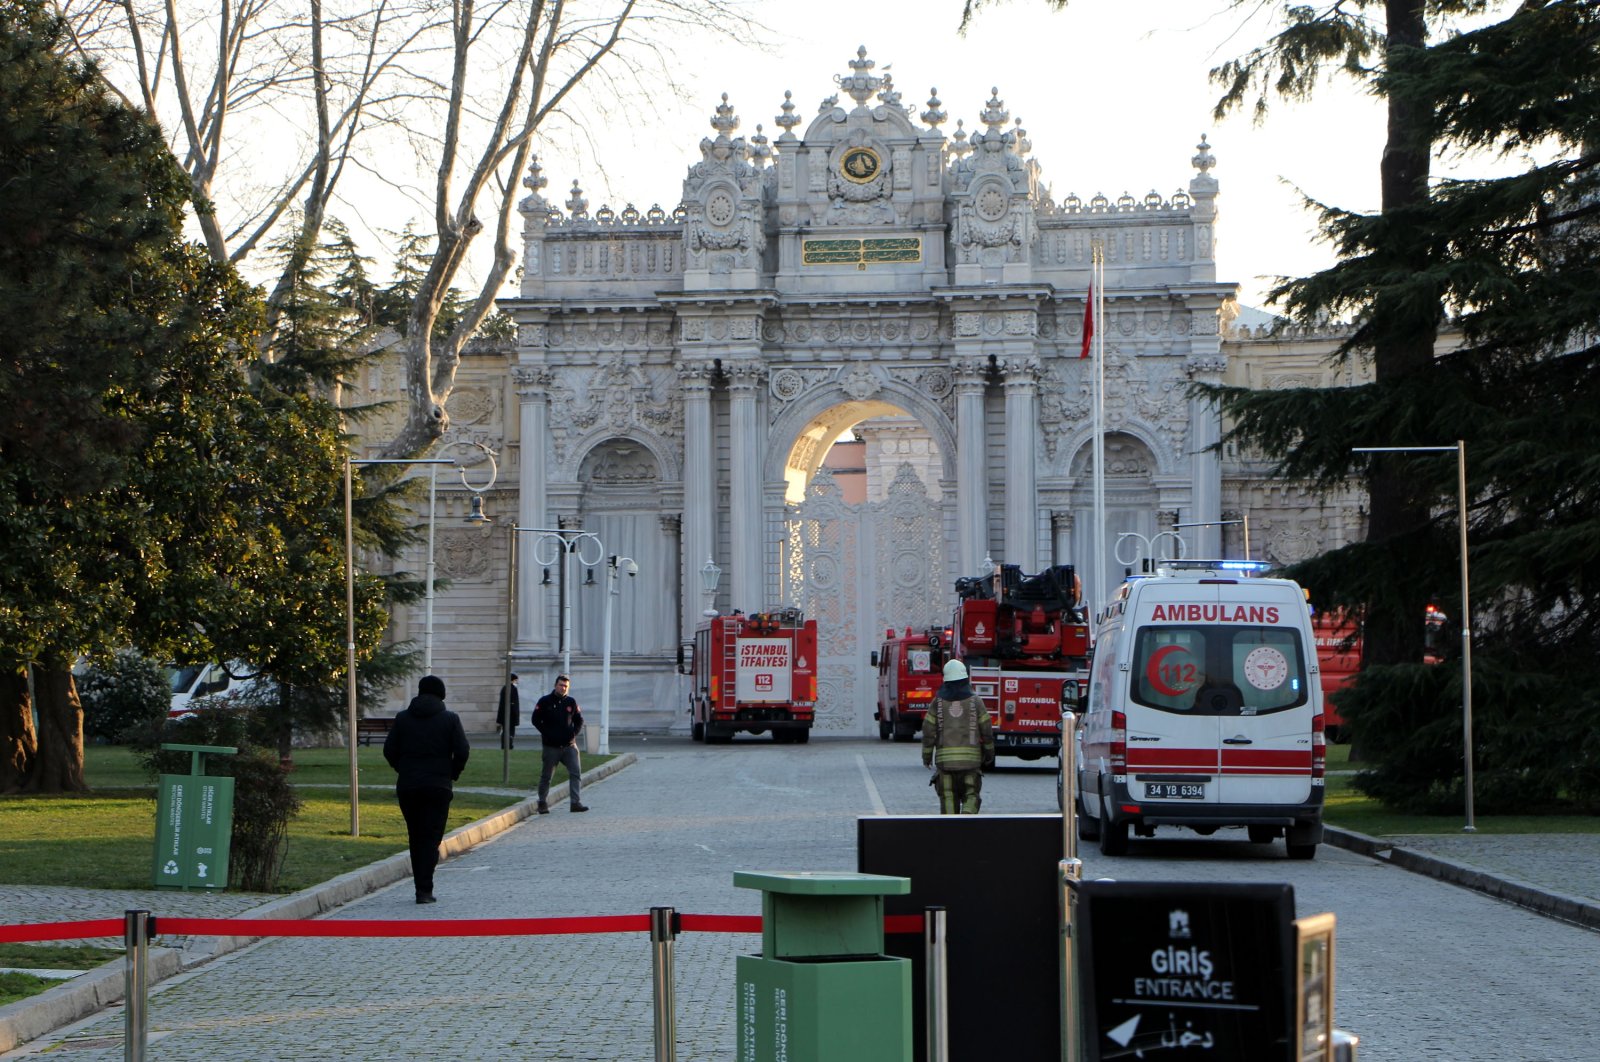 Fire trucks and ambulances are seen outside the Dolmabahçe Palace, Istanbul, Turkey, Mar. 4, 2022. (DHA Photo)